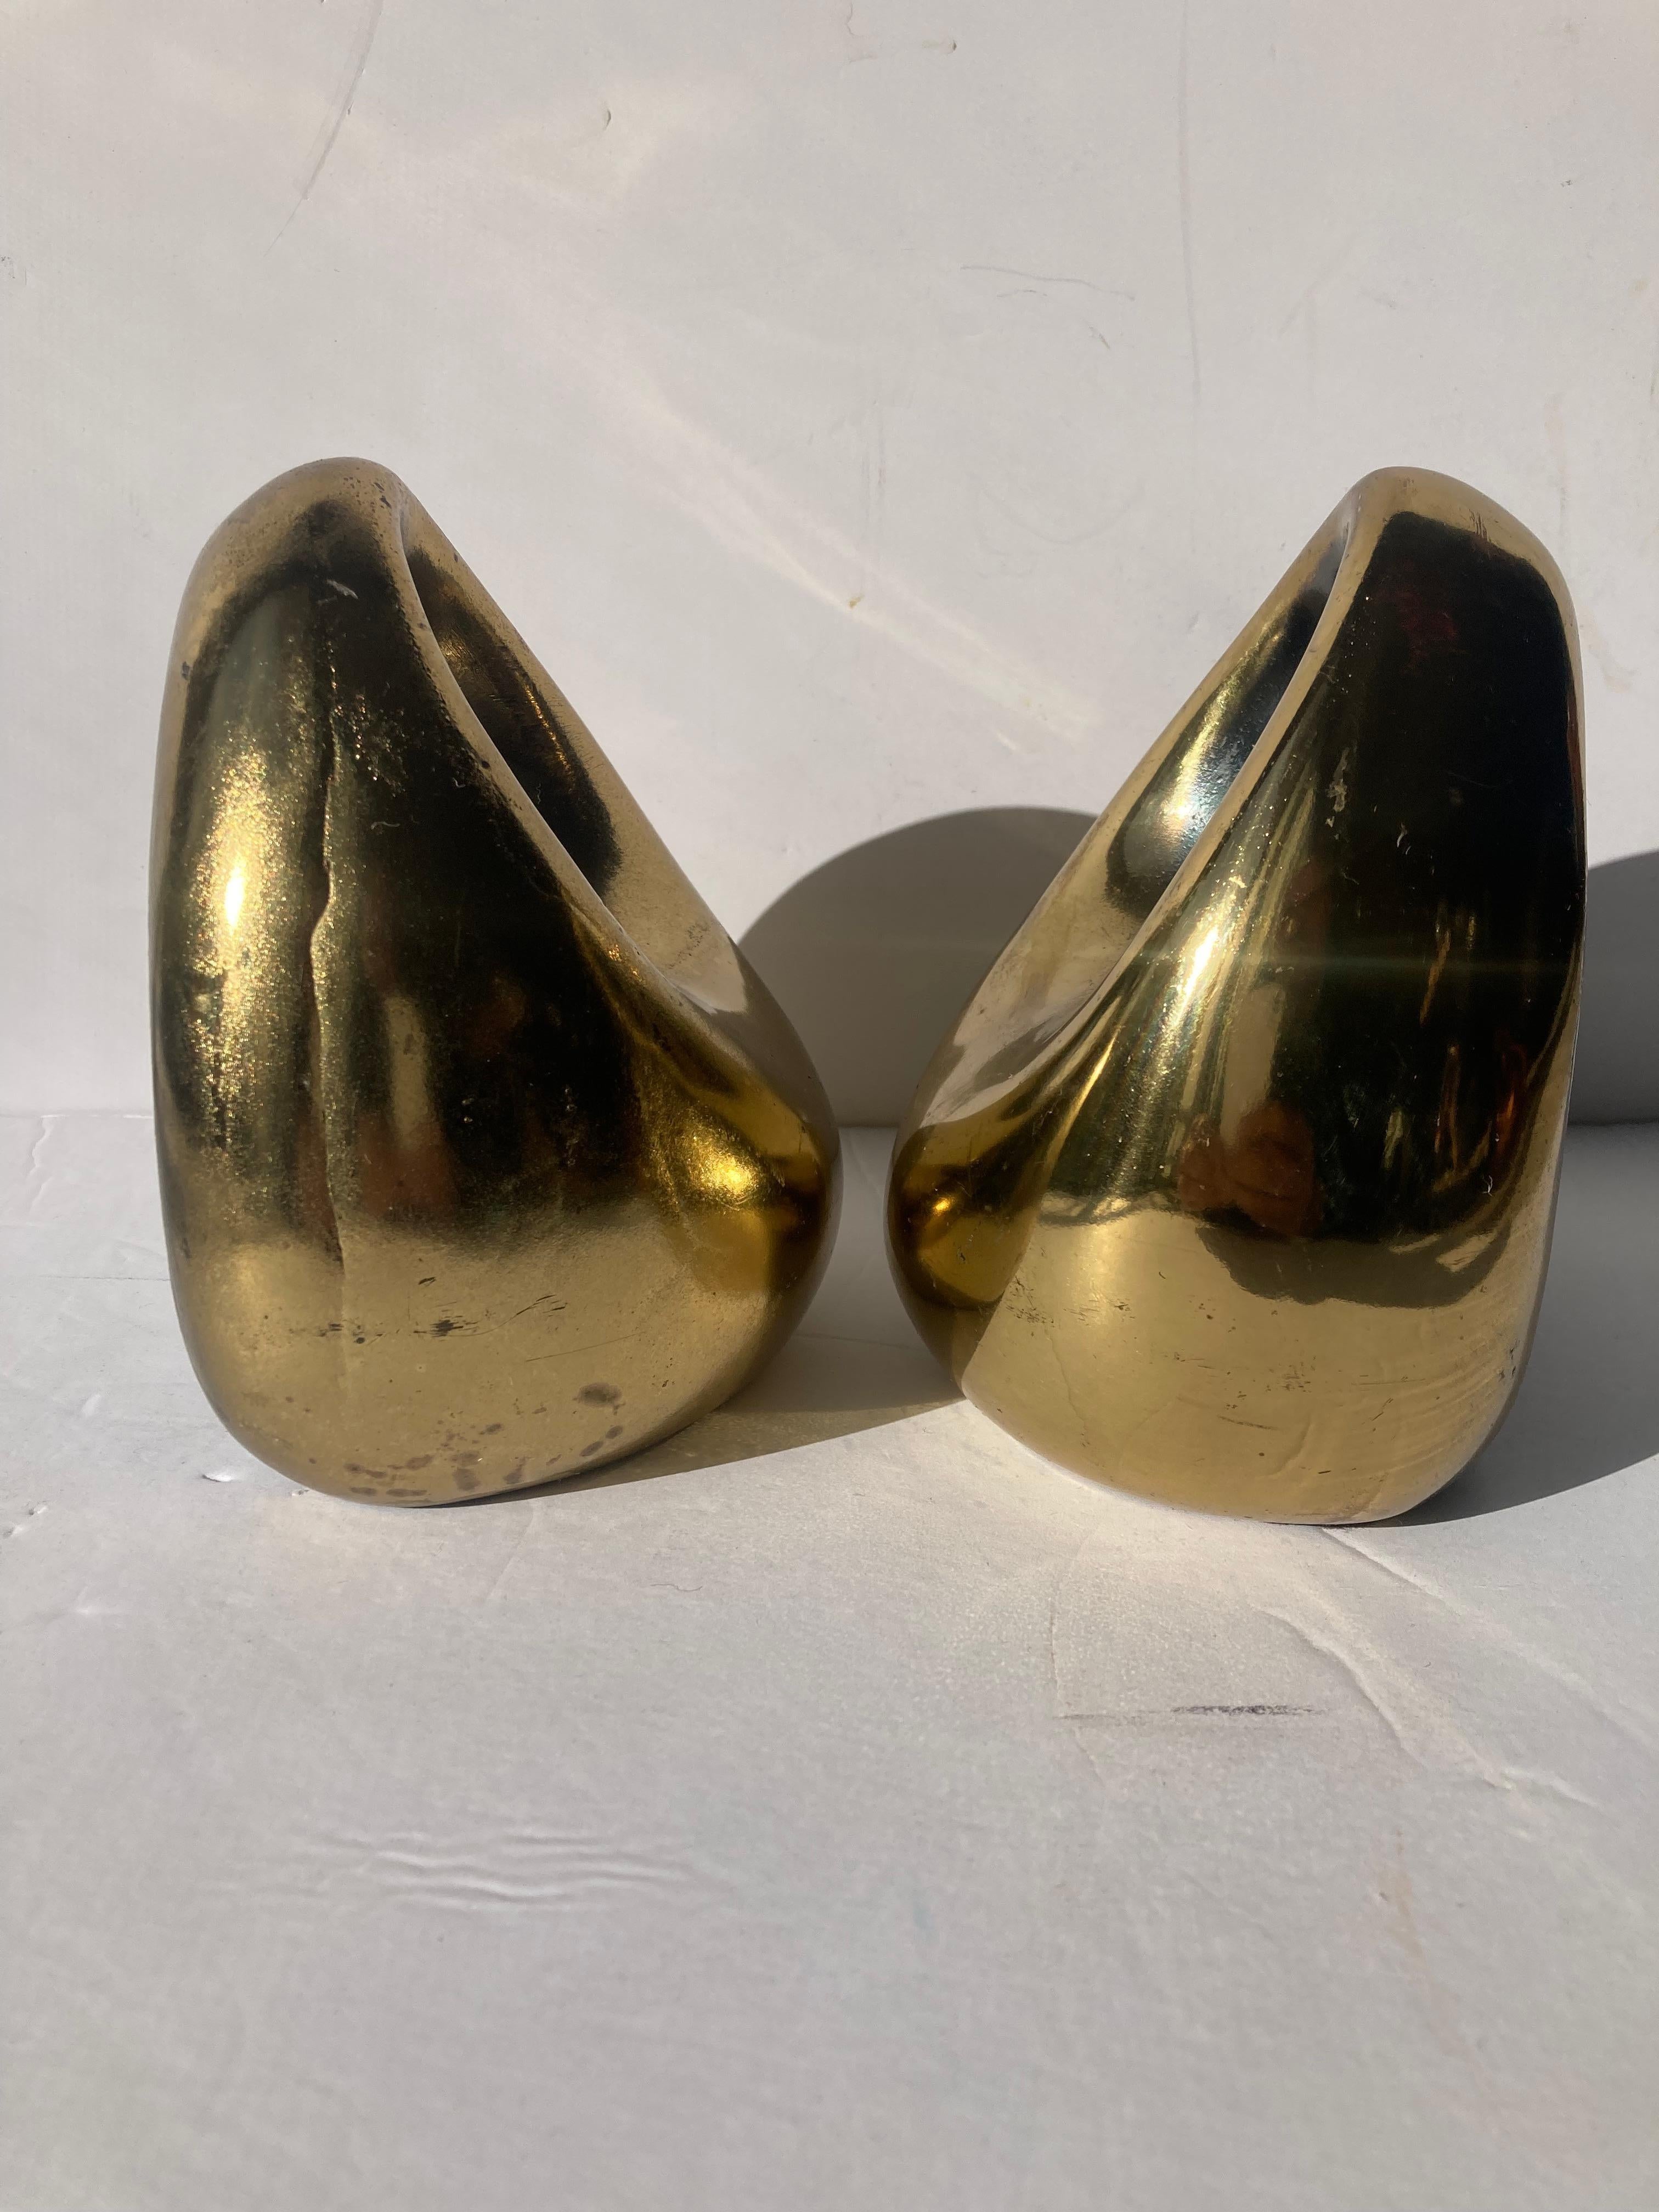 Cast Ben Seibel for Jenfred-Ware Bookends in Brass Finish For Sale